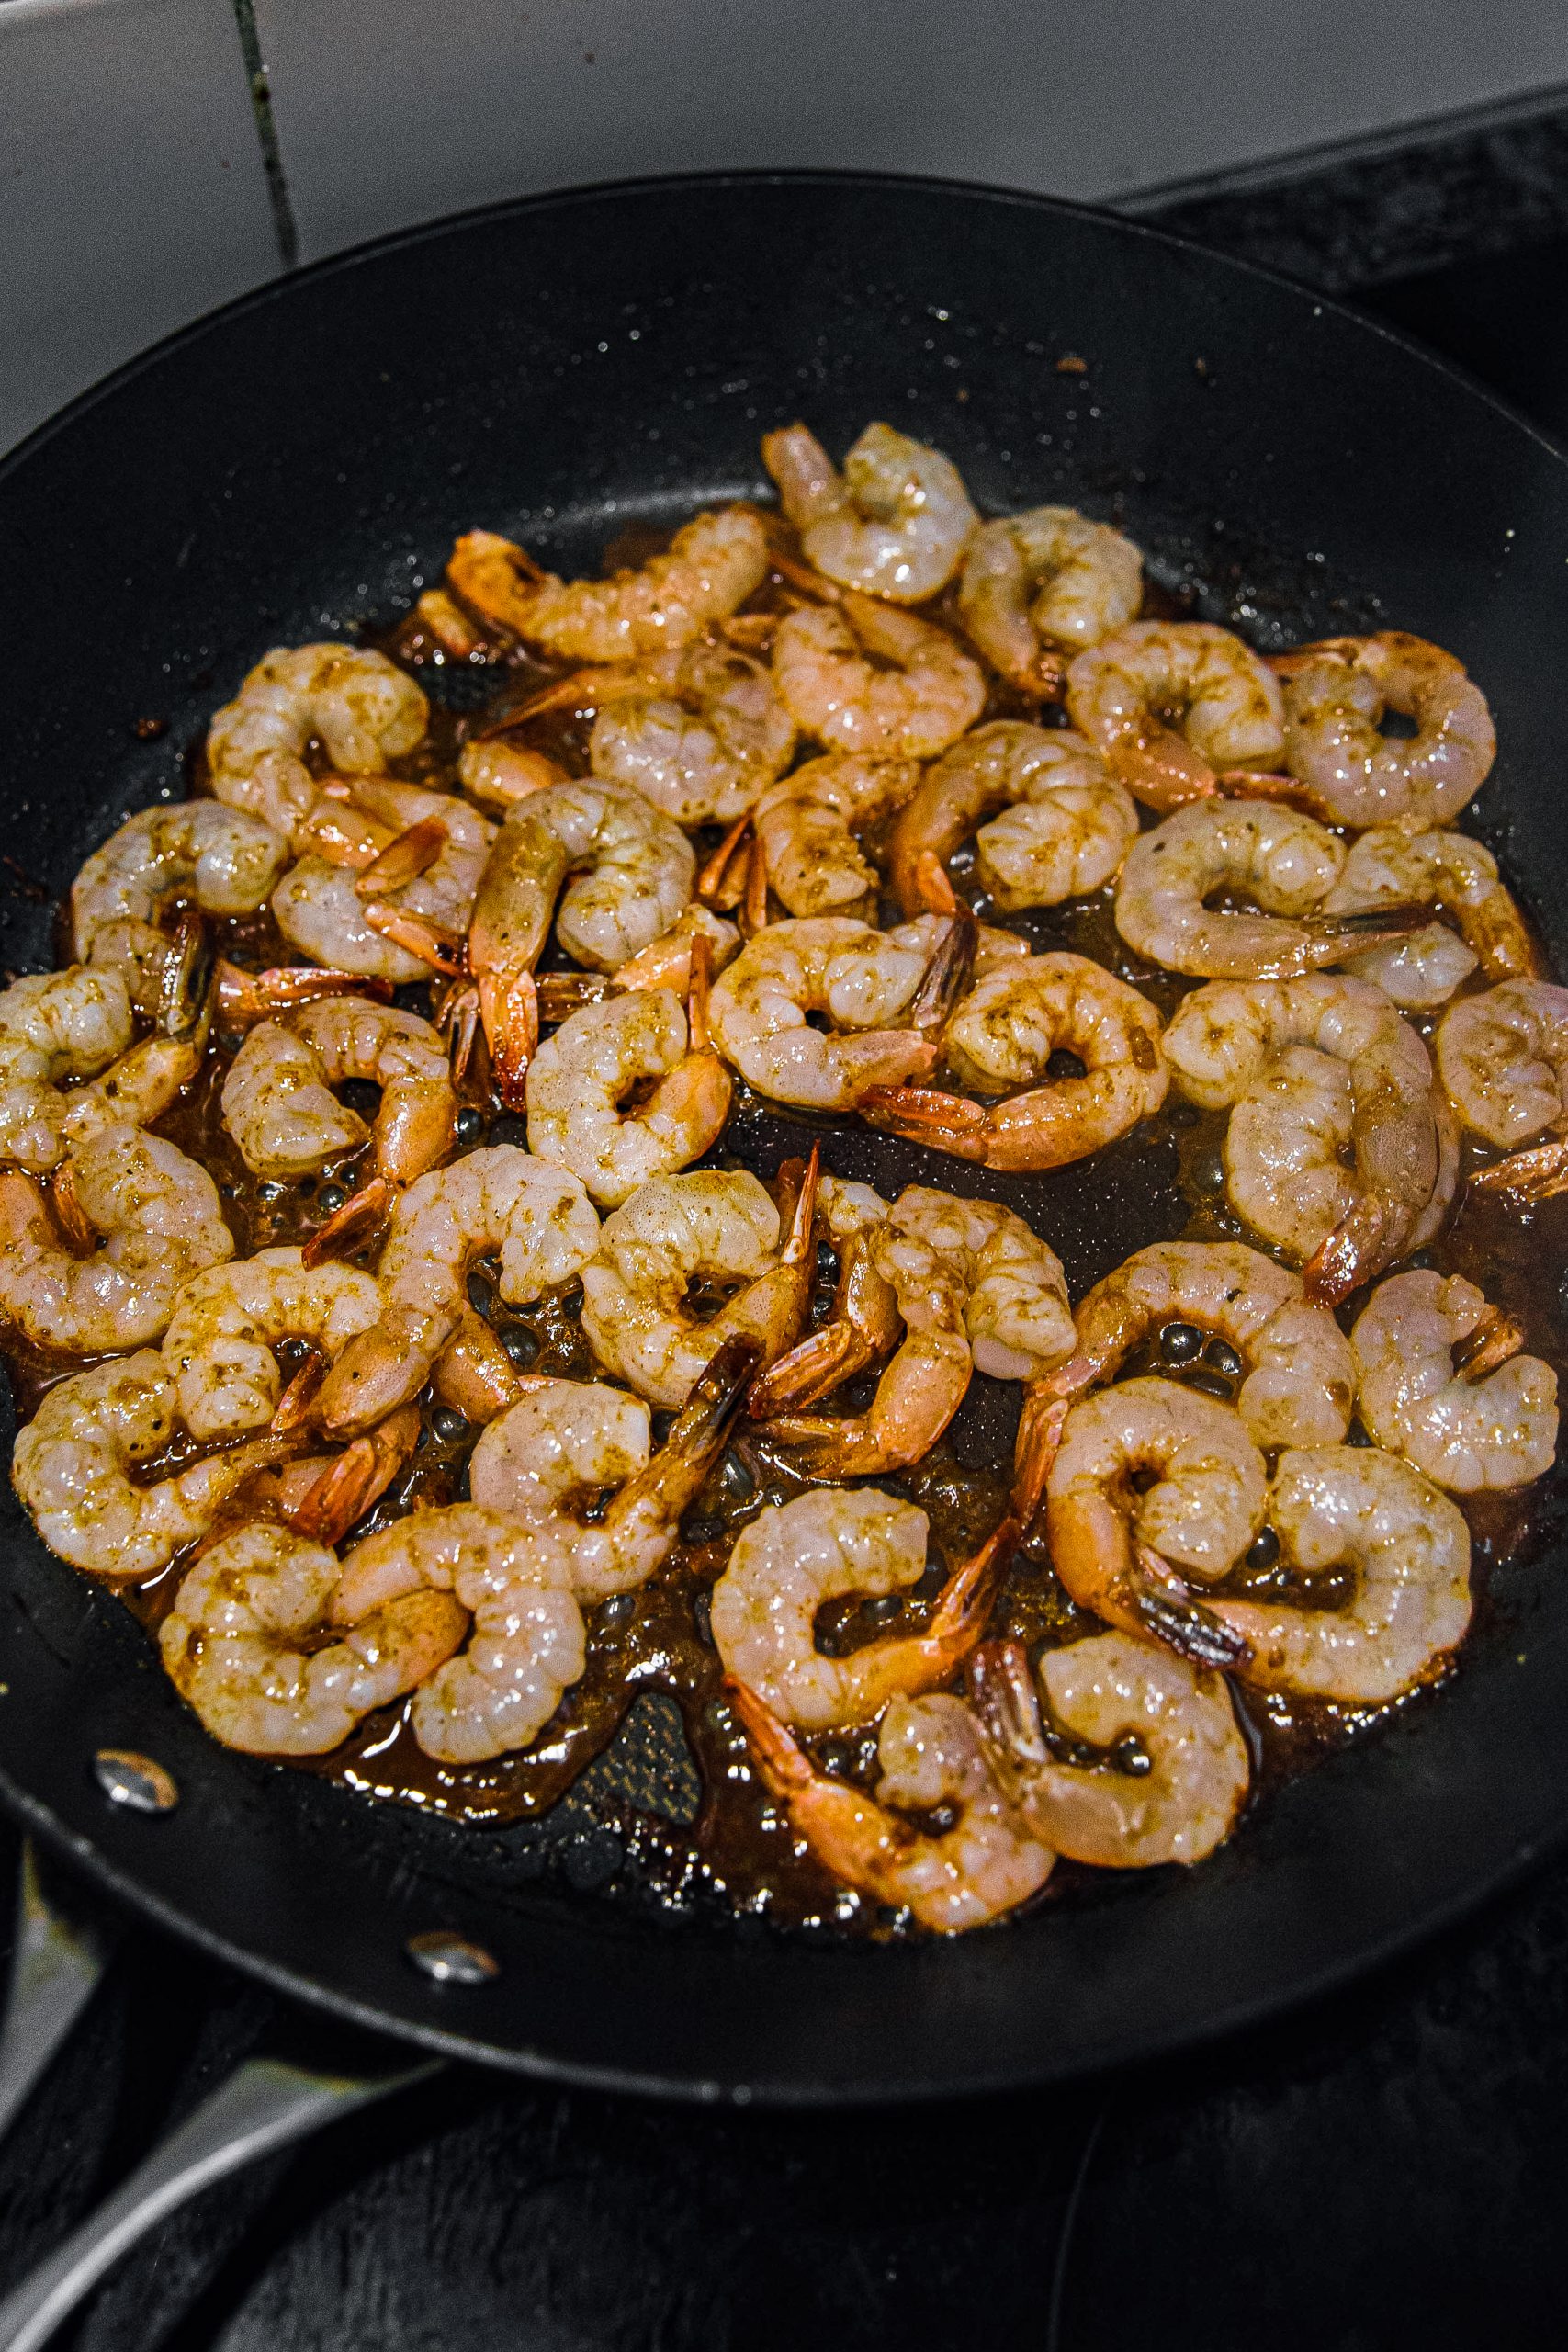 Add shrimp and cook for 2-3 minutes a side until pink and cooked through.